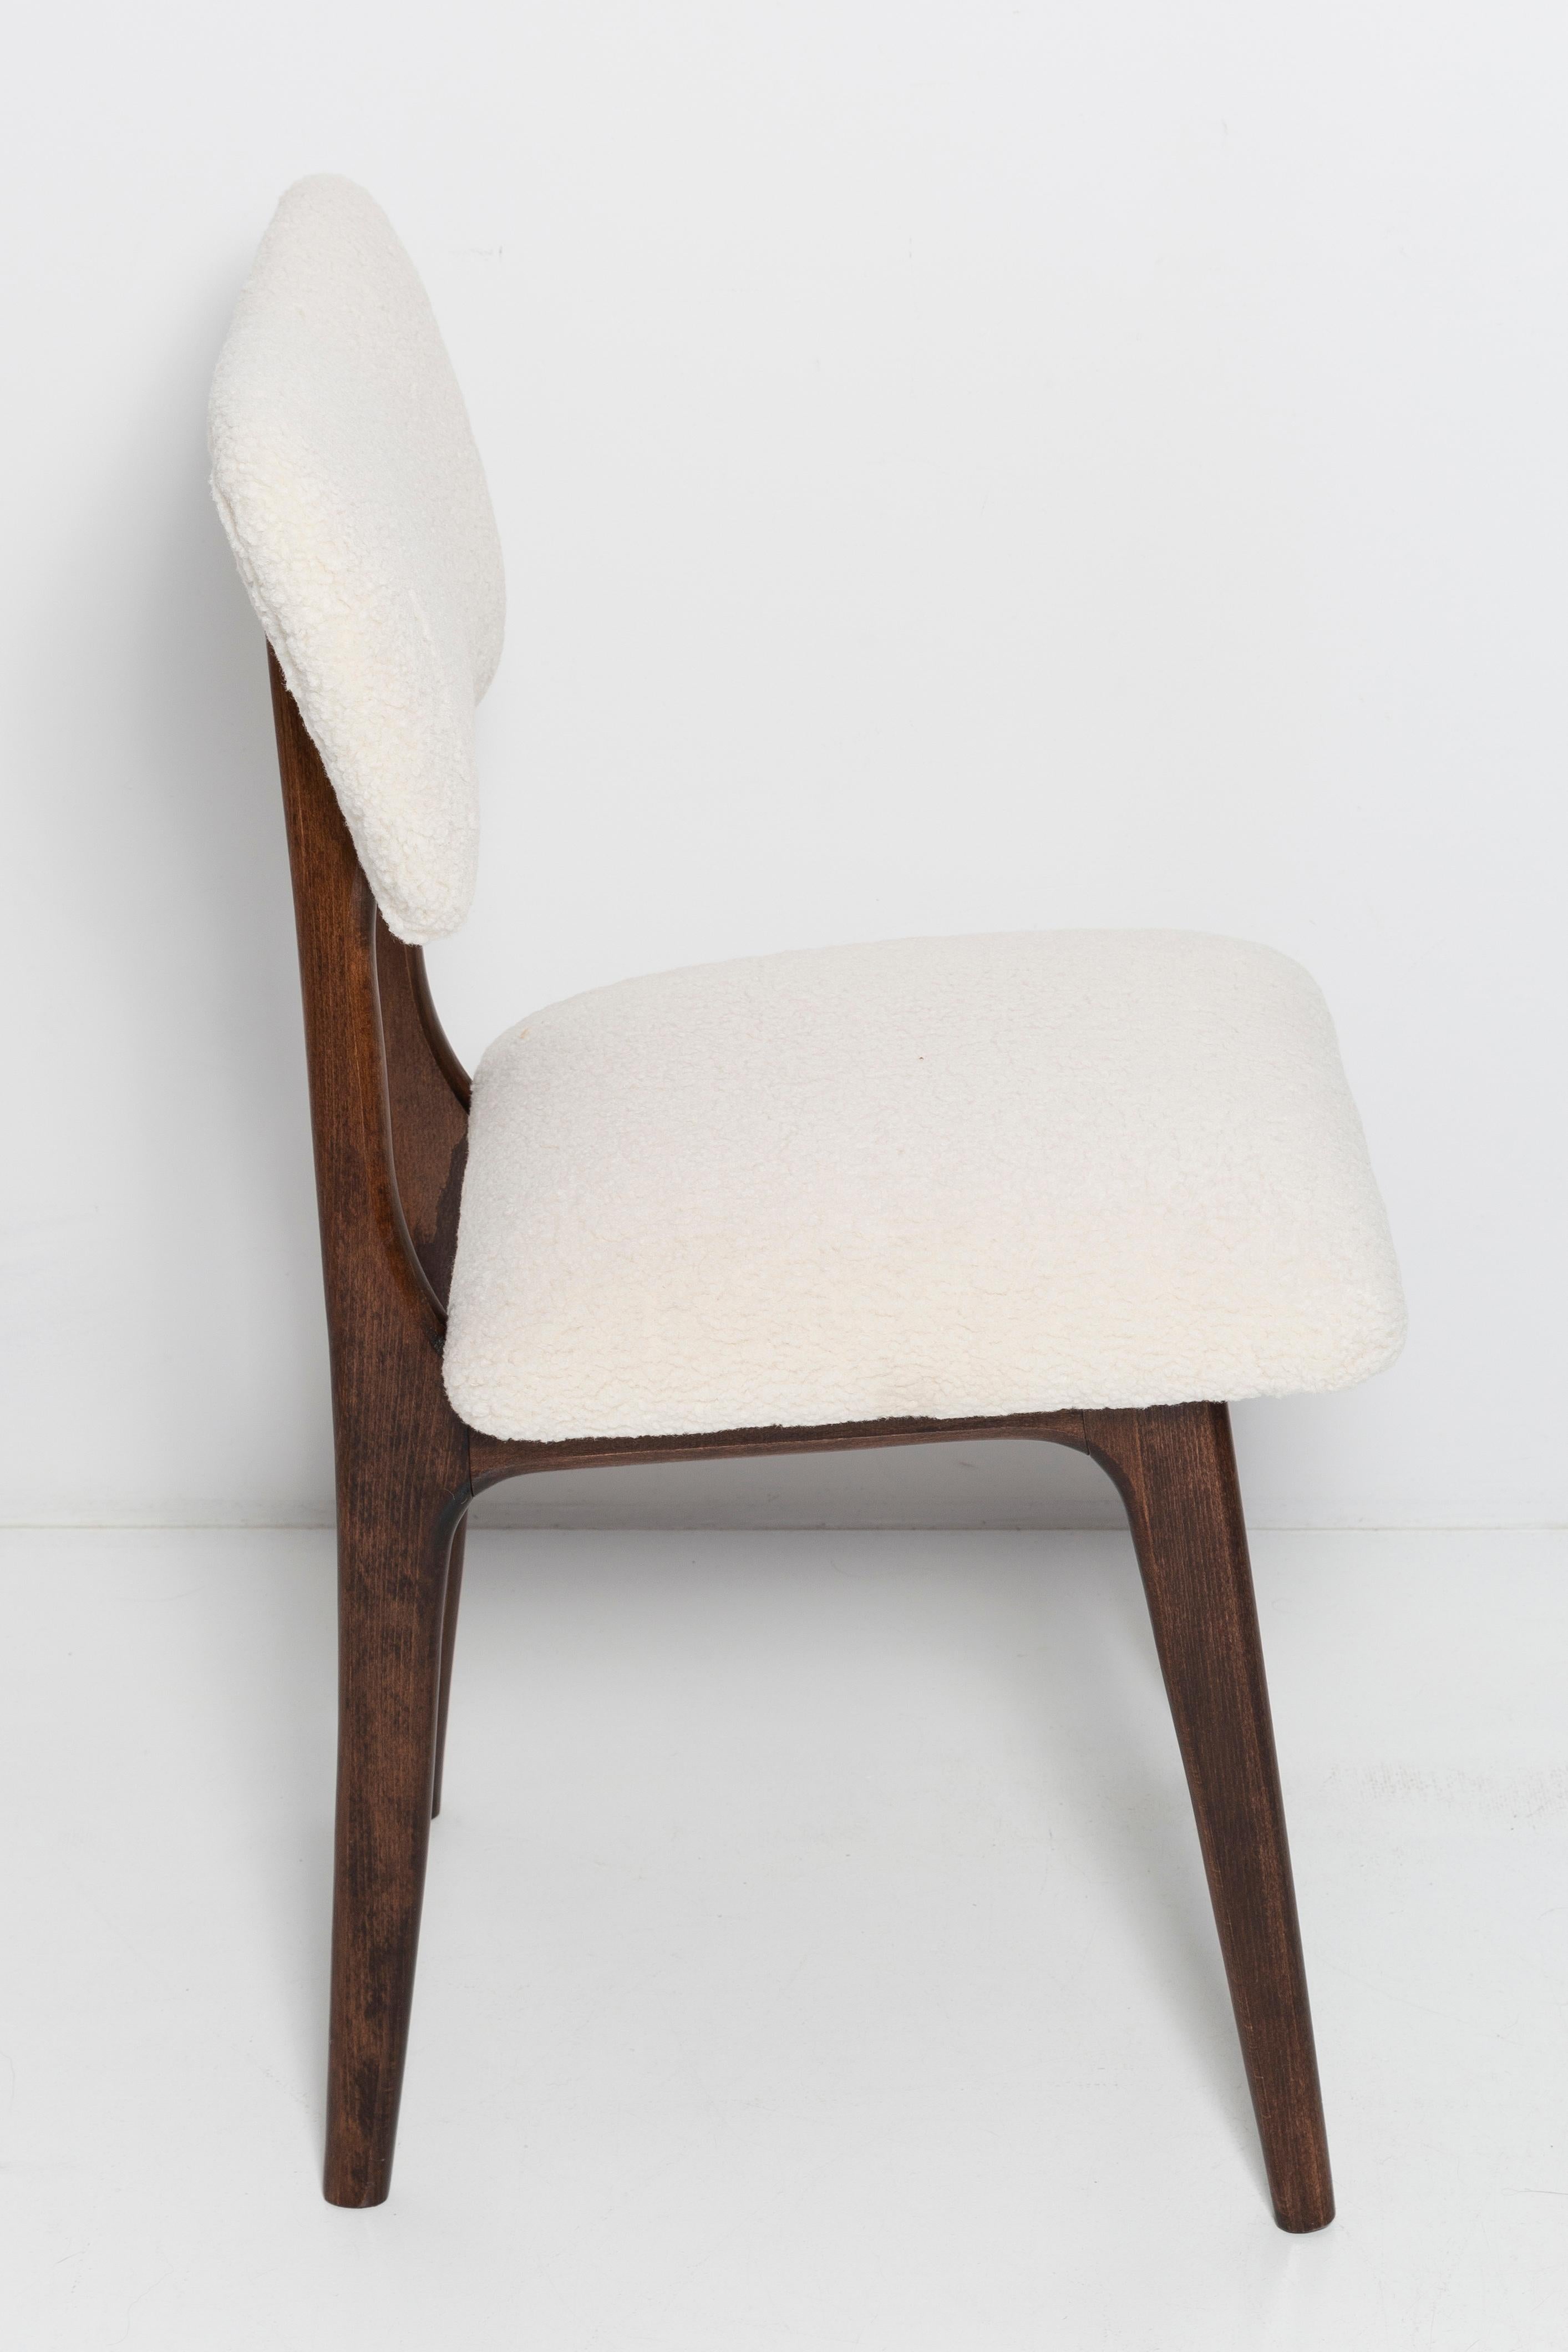 Hand-Crafted 20th Century Light Crème Boucle Walnut Wood Butterfly Chair, Europe, 1960. For Sale